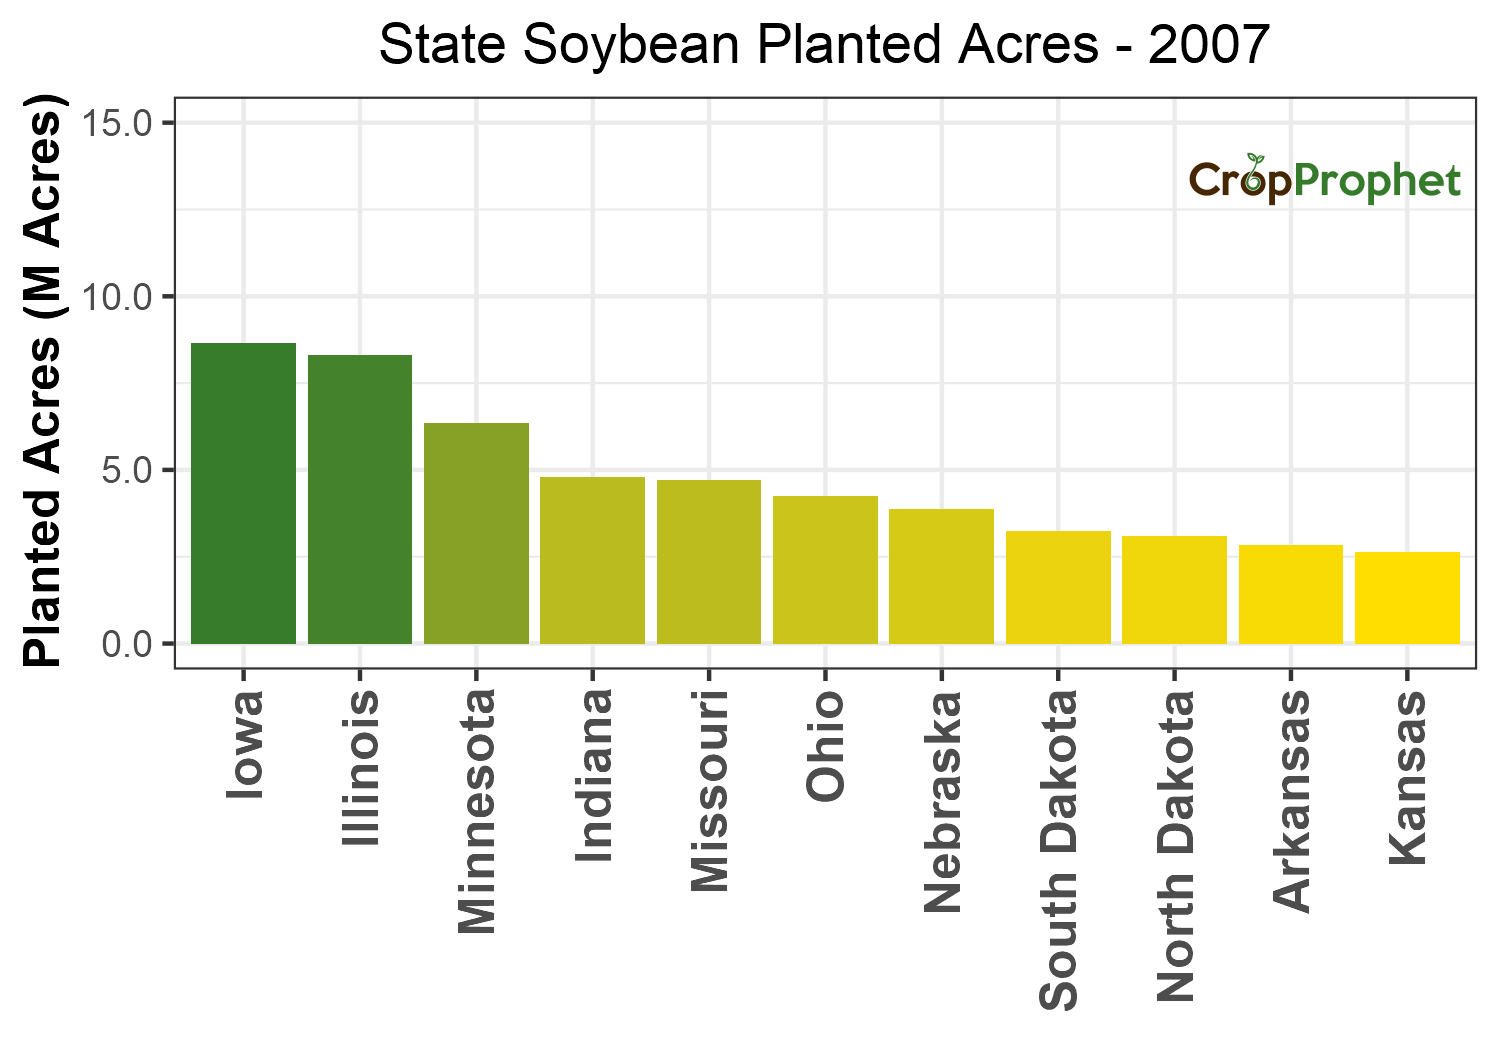 Soybean Production by State - 2007 Rankings